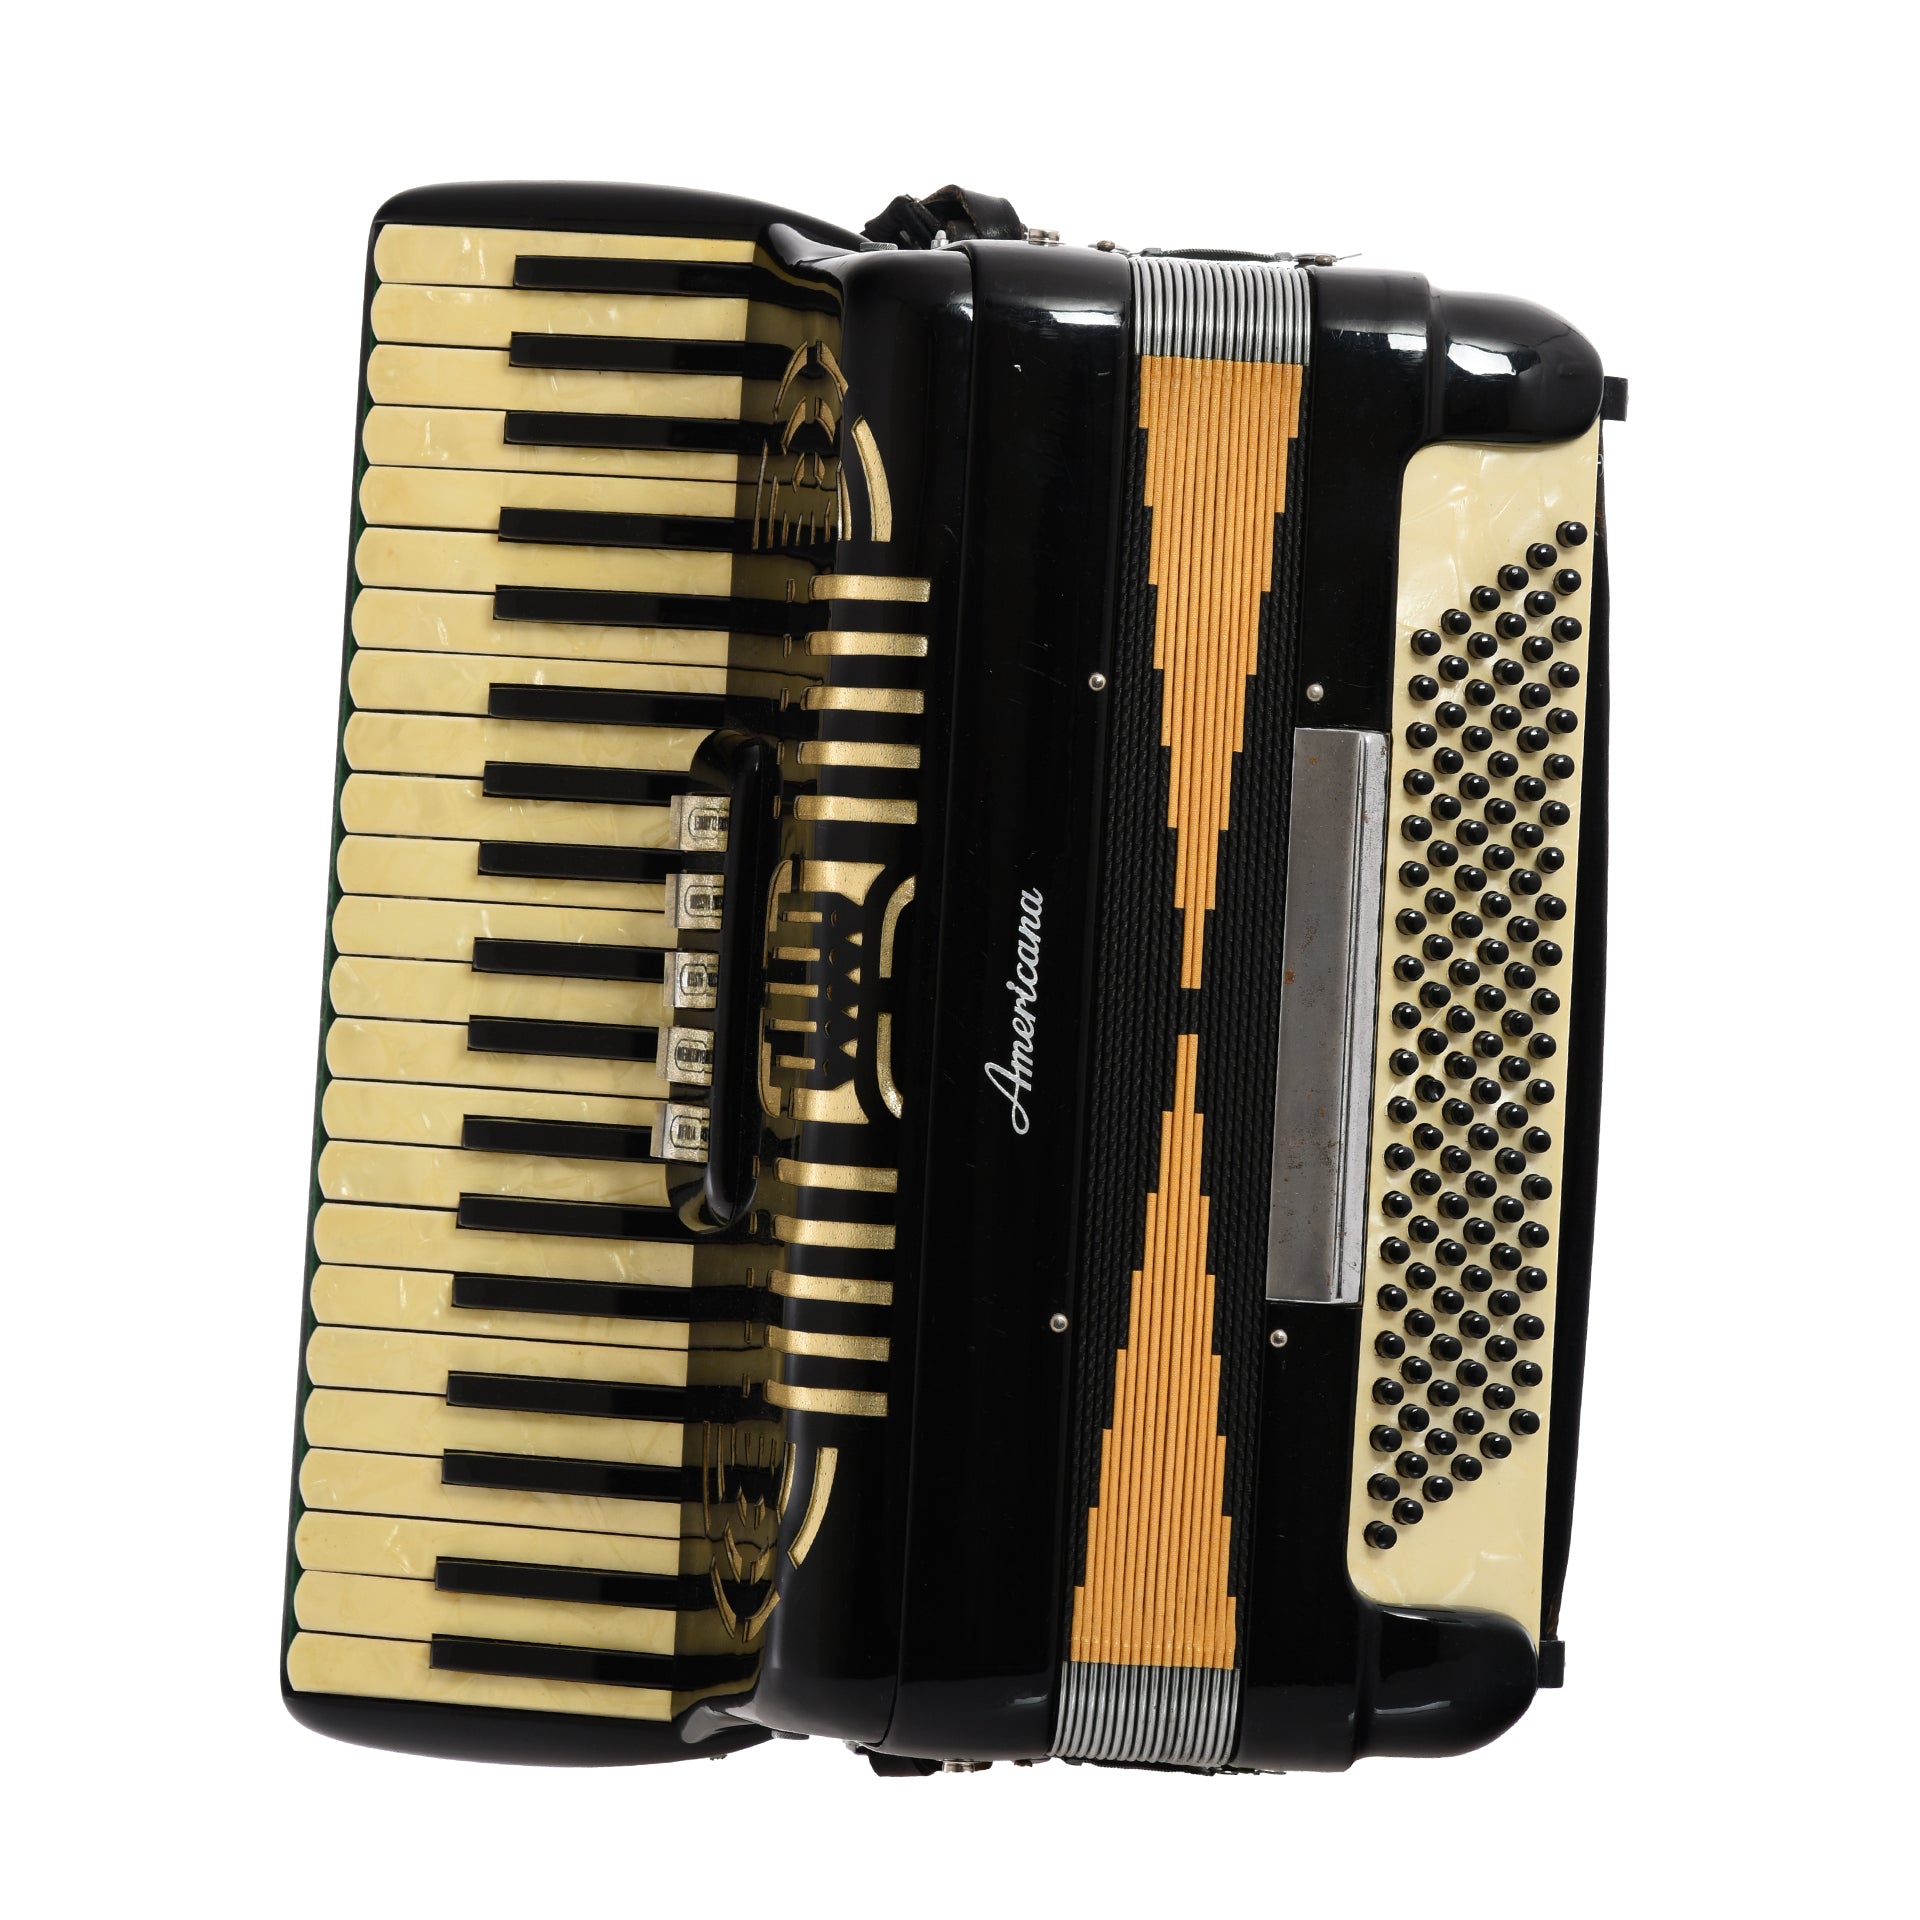 Front of American Keyboard Accordion